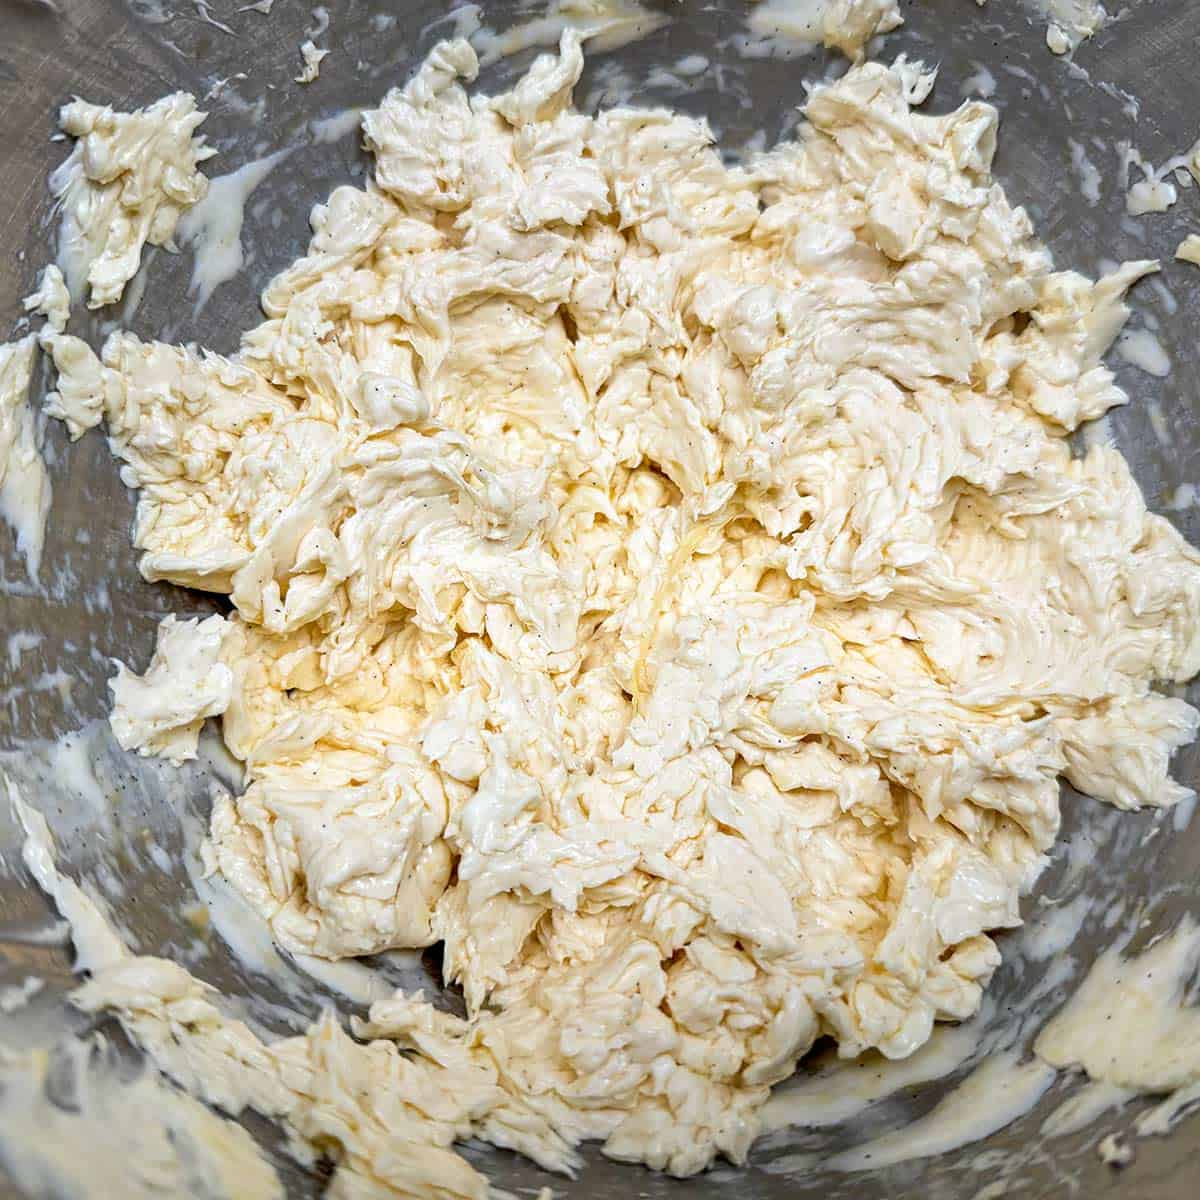 Egg added to butter sugar mixture.